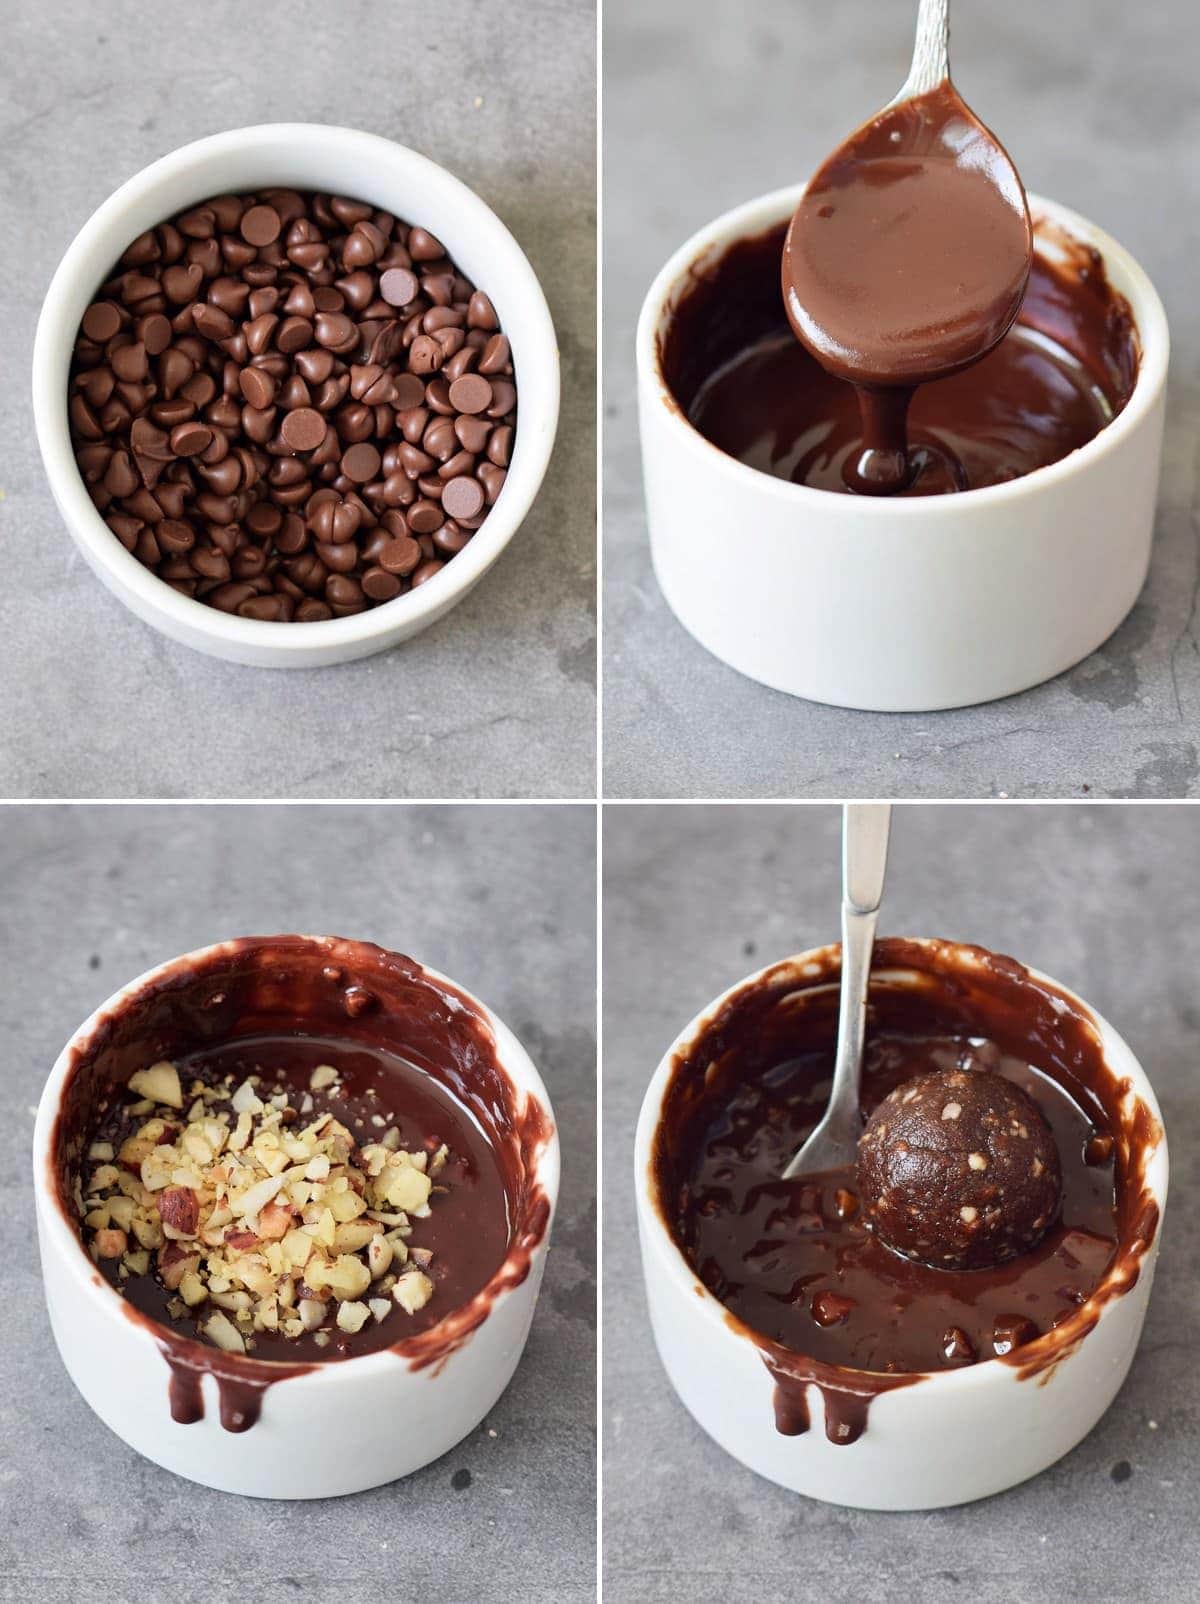 4 step by step photos of melting dairy free chocolate and dipping hazelnut truffels in it